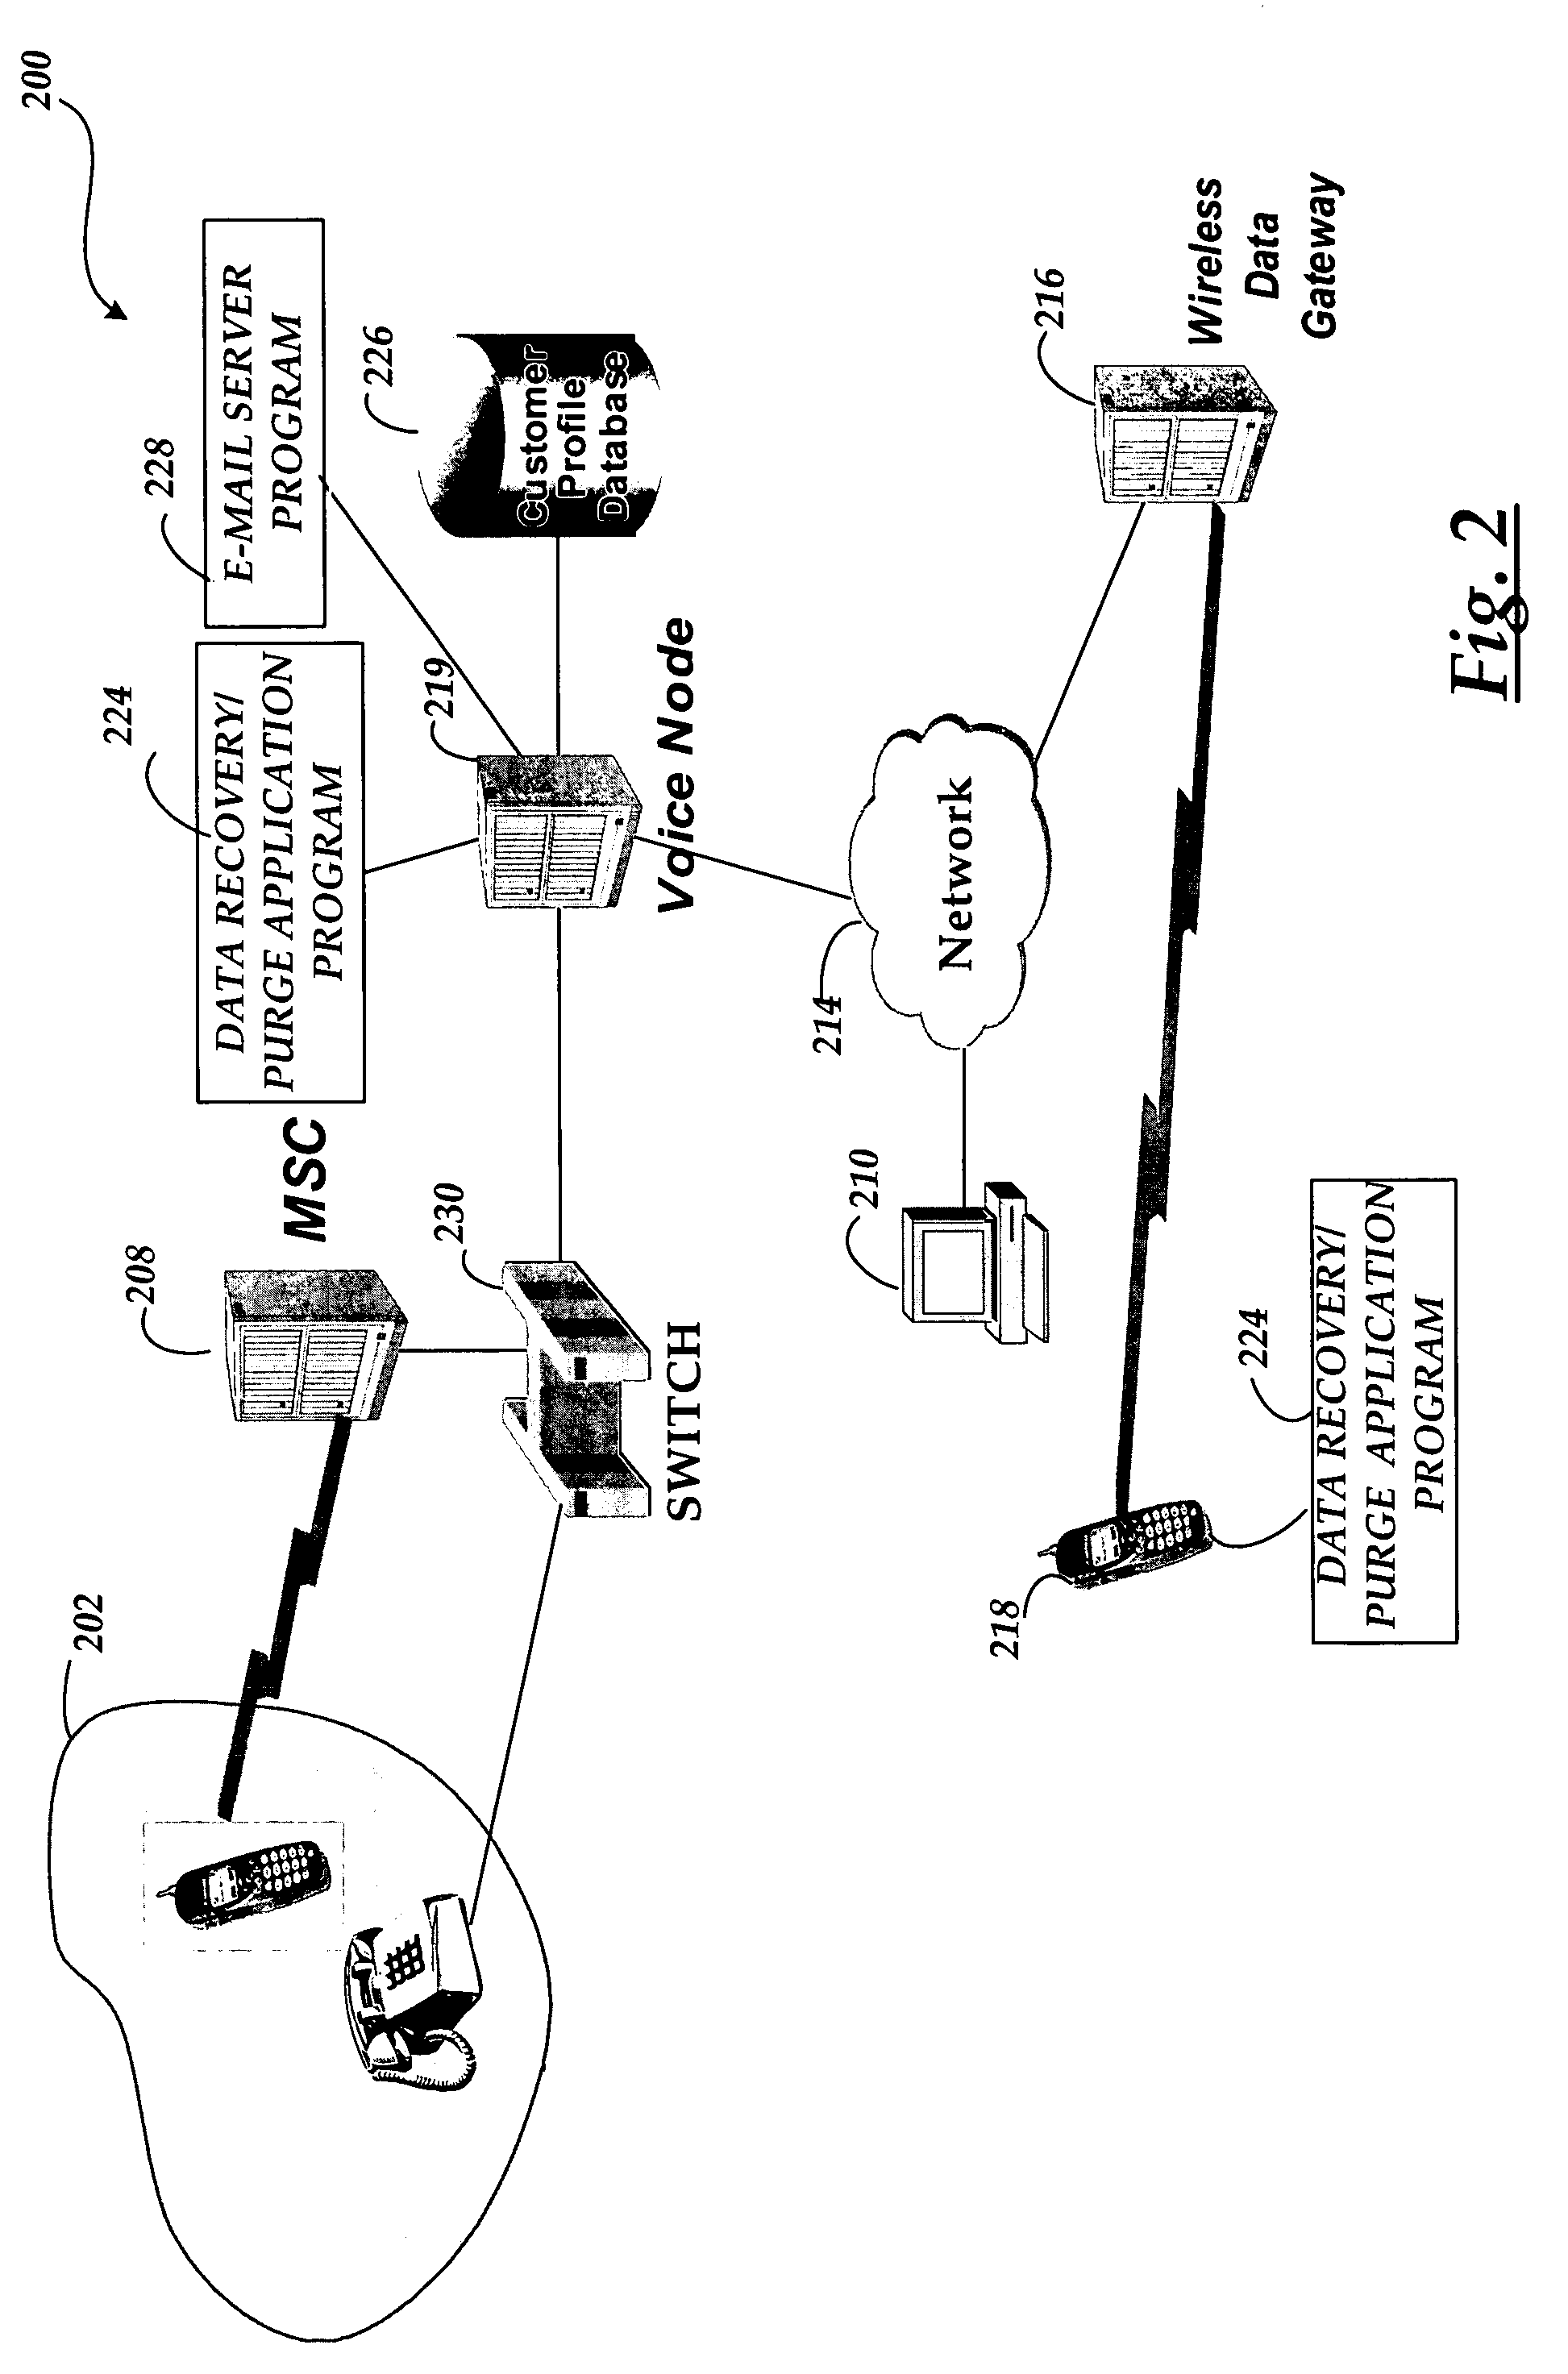 System and methods for remotely recovering and purging data from a wireless device in a communications network